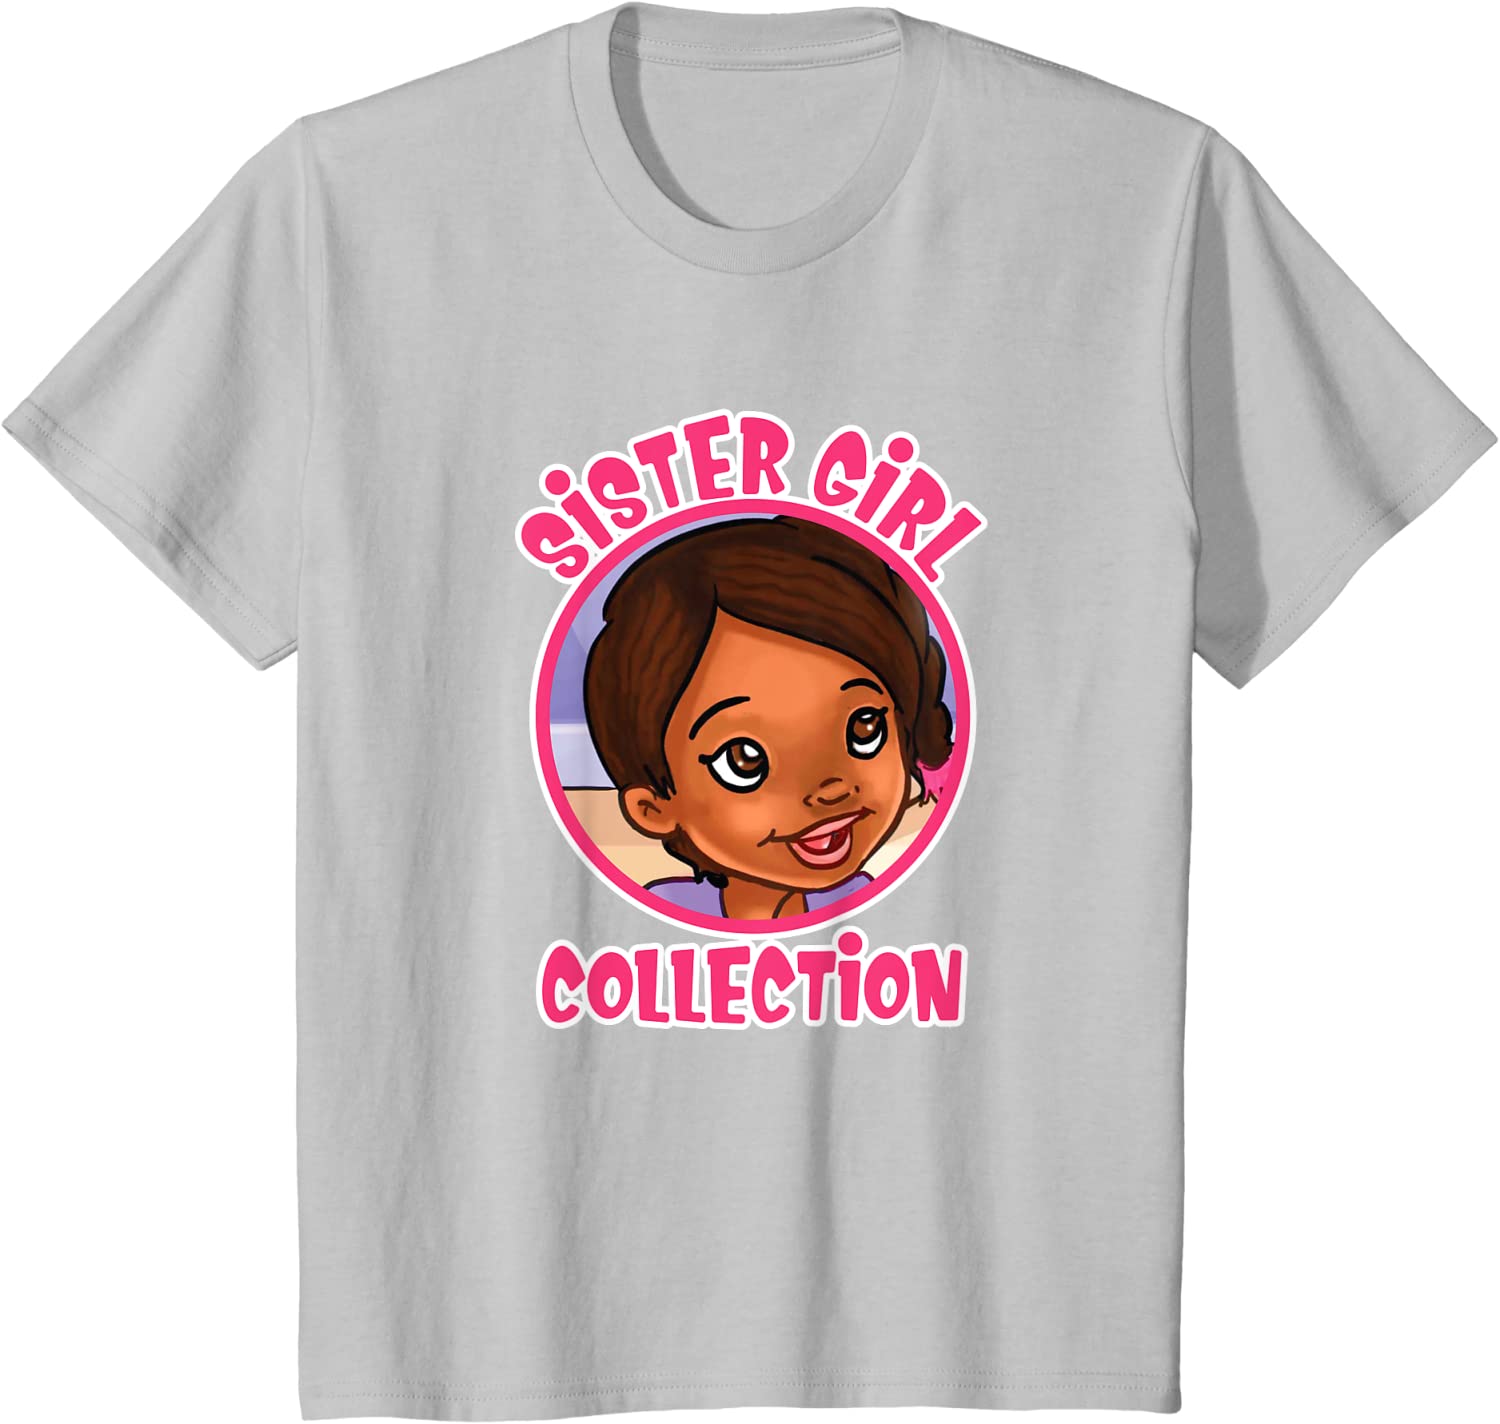 SISTER GIRL COLLECTION T-SHIRT (YOUTH)